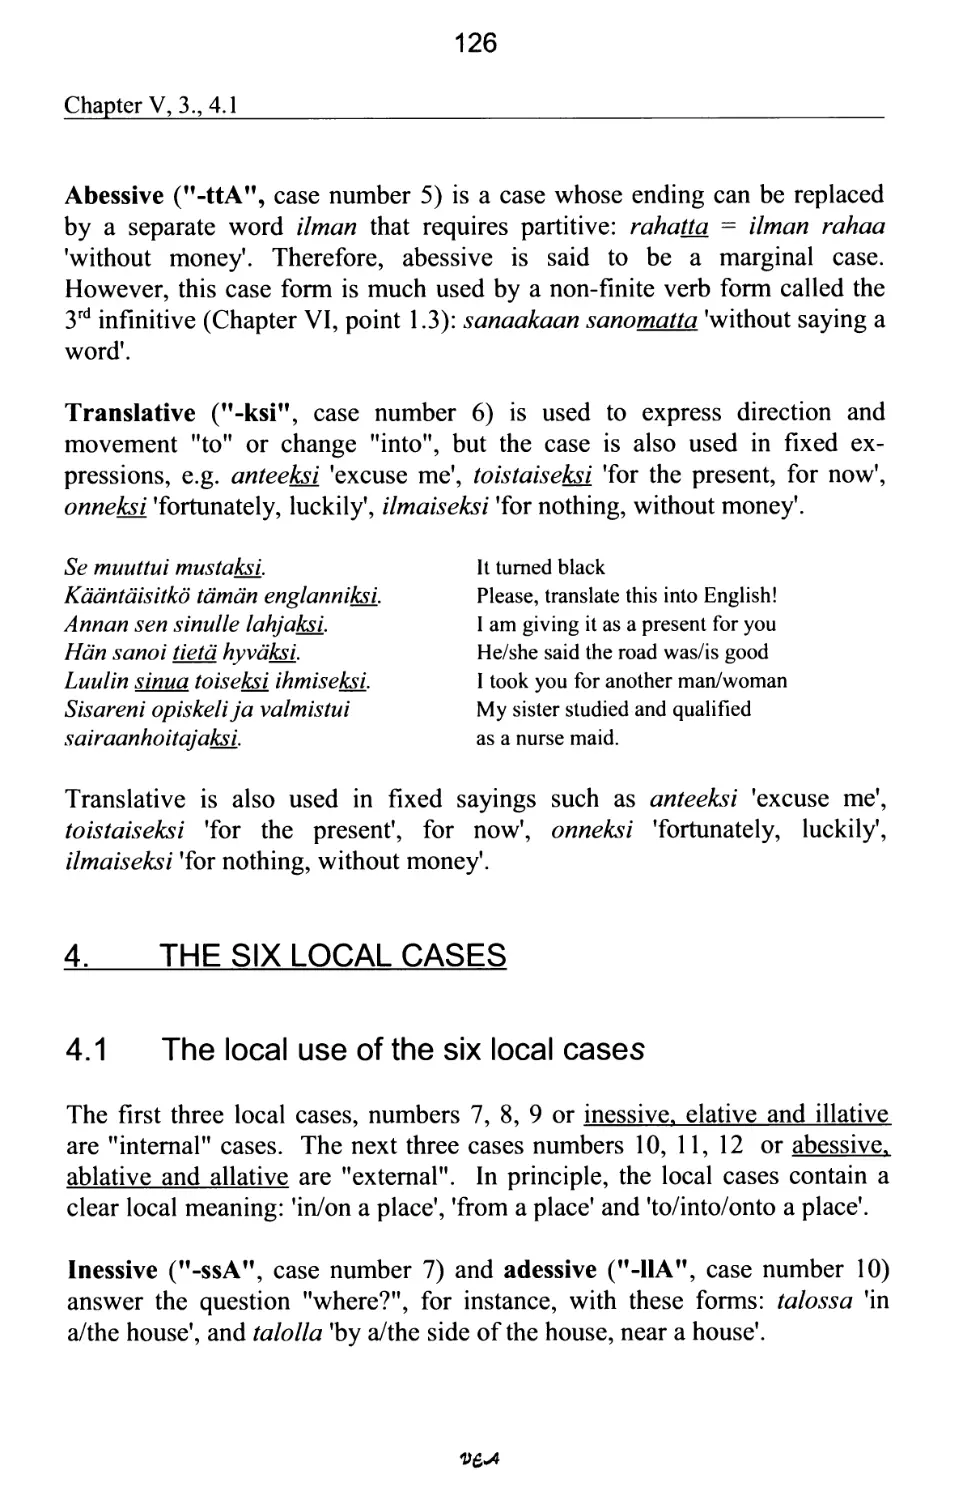 4. THE SIX LOCAL CASES